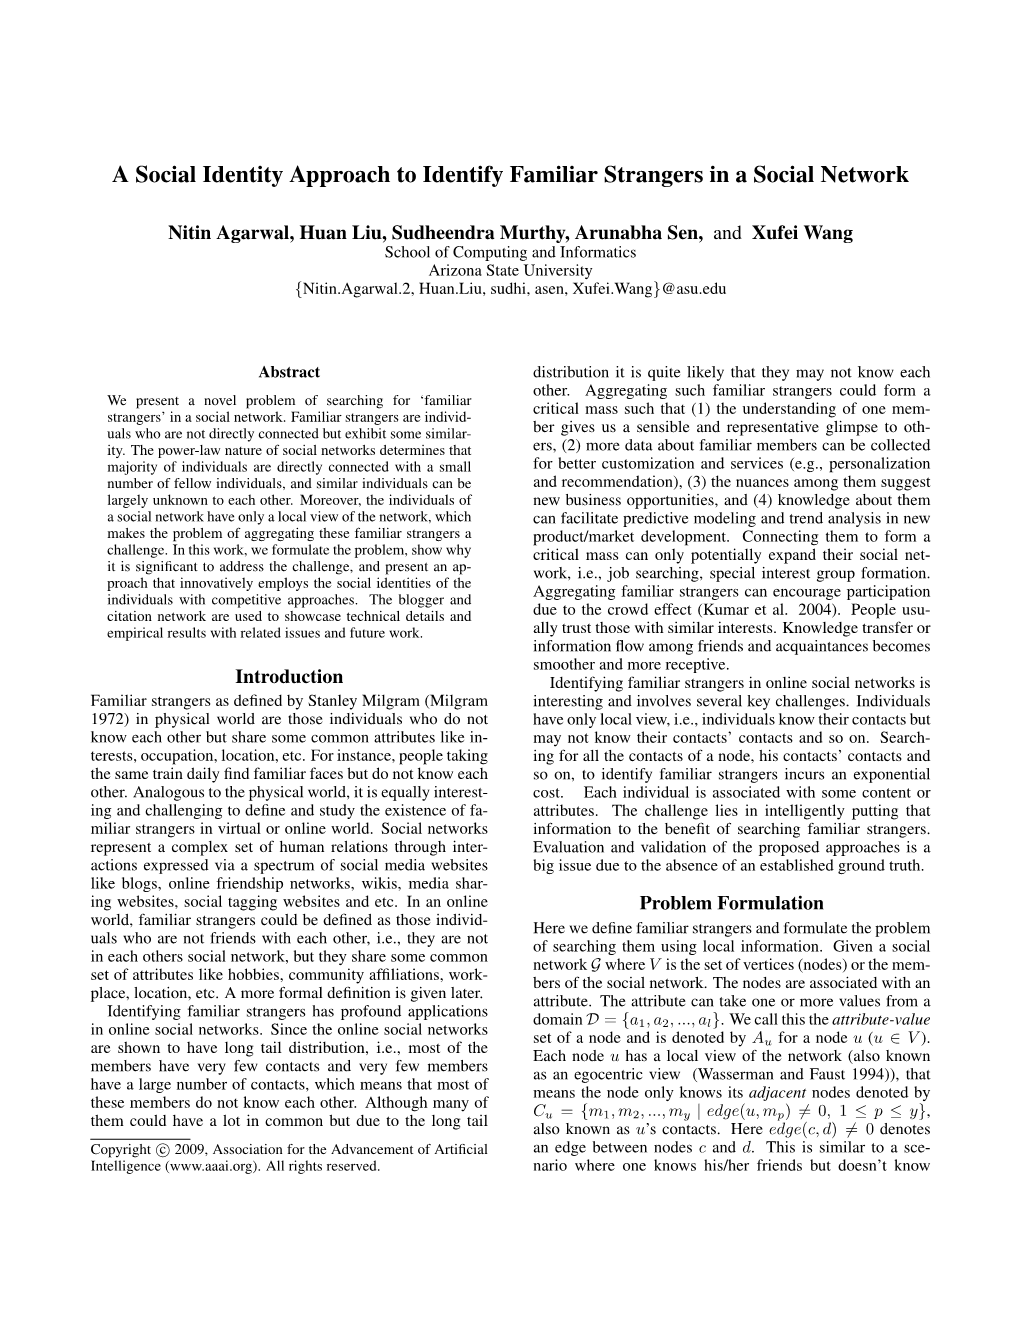 A Social Identity Approach to Identify Familiar Strangers in a Social Network